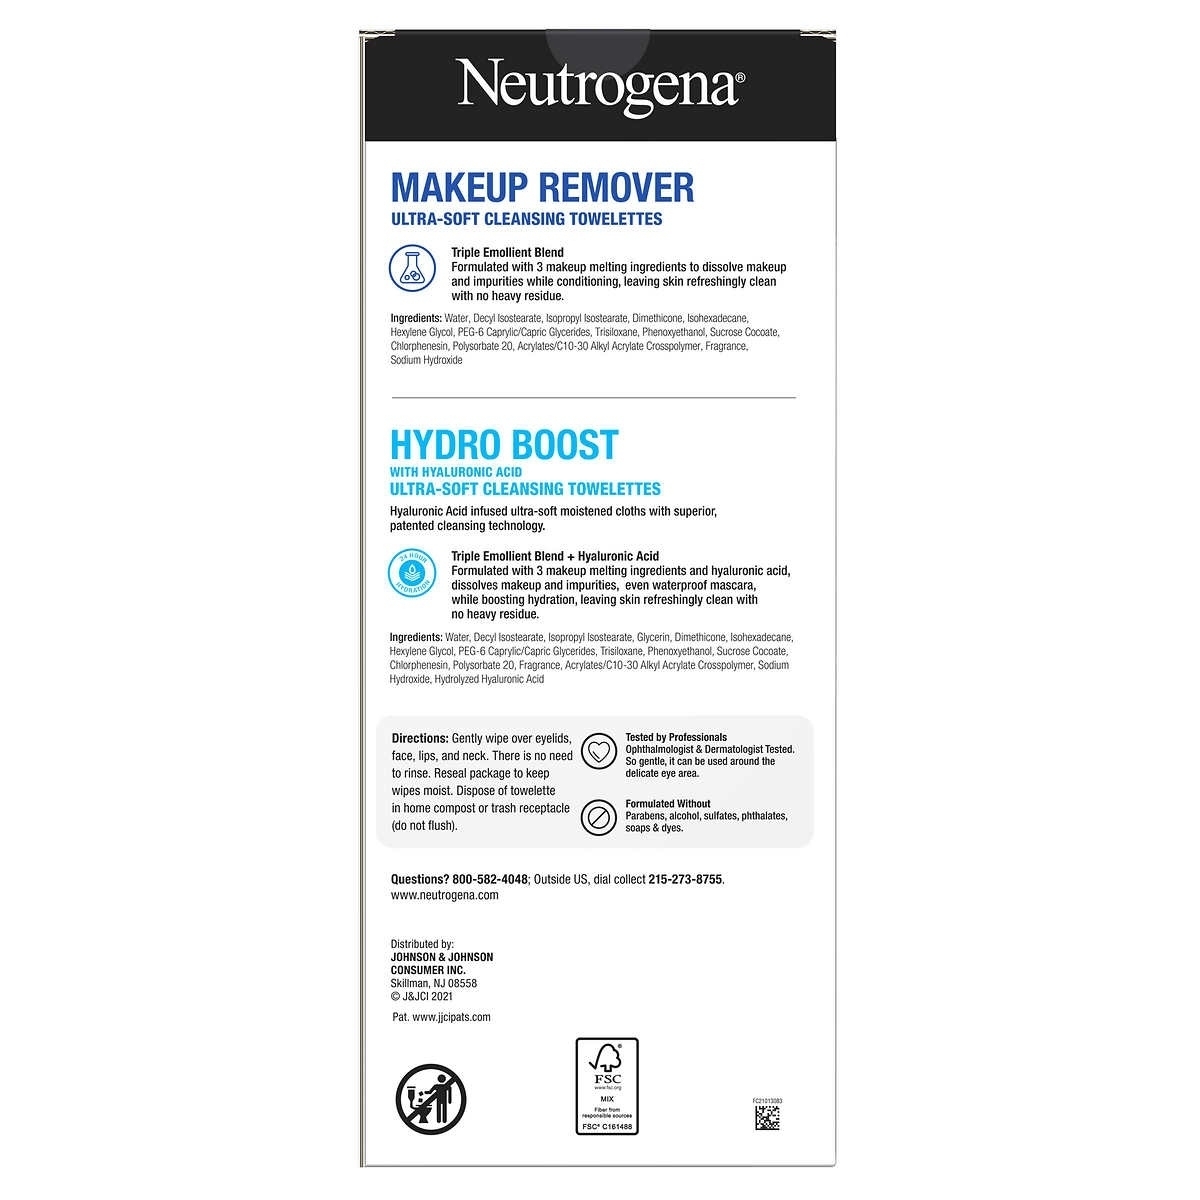 Neutrogena Makeup Remover & Hydro Boost Ultra-Soft Cleansing Towelettes, 139 Ct